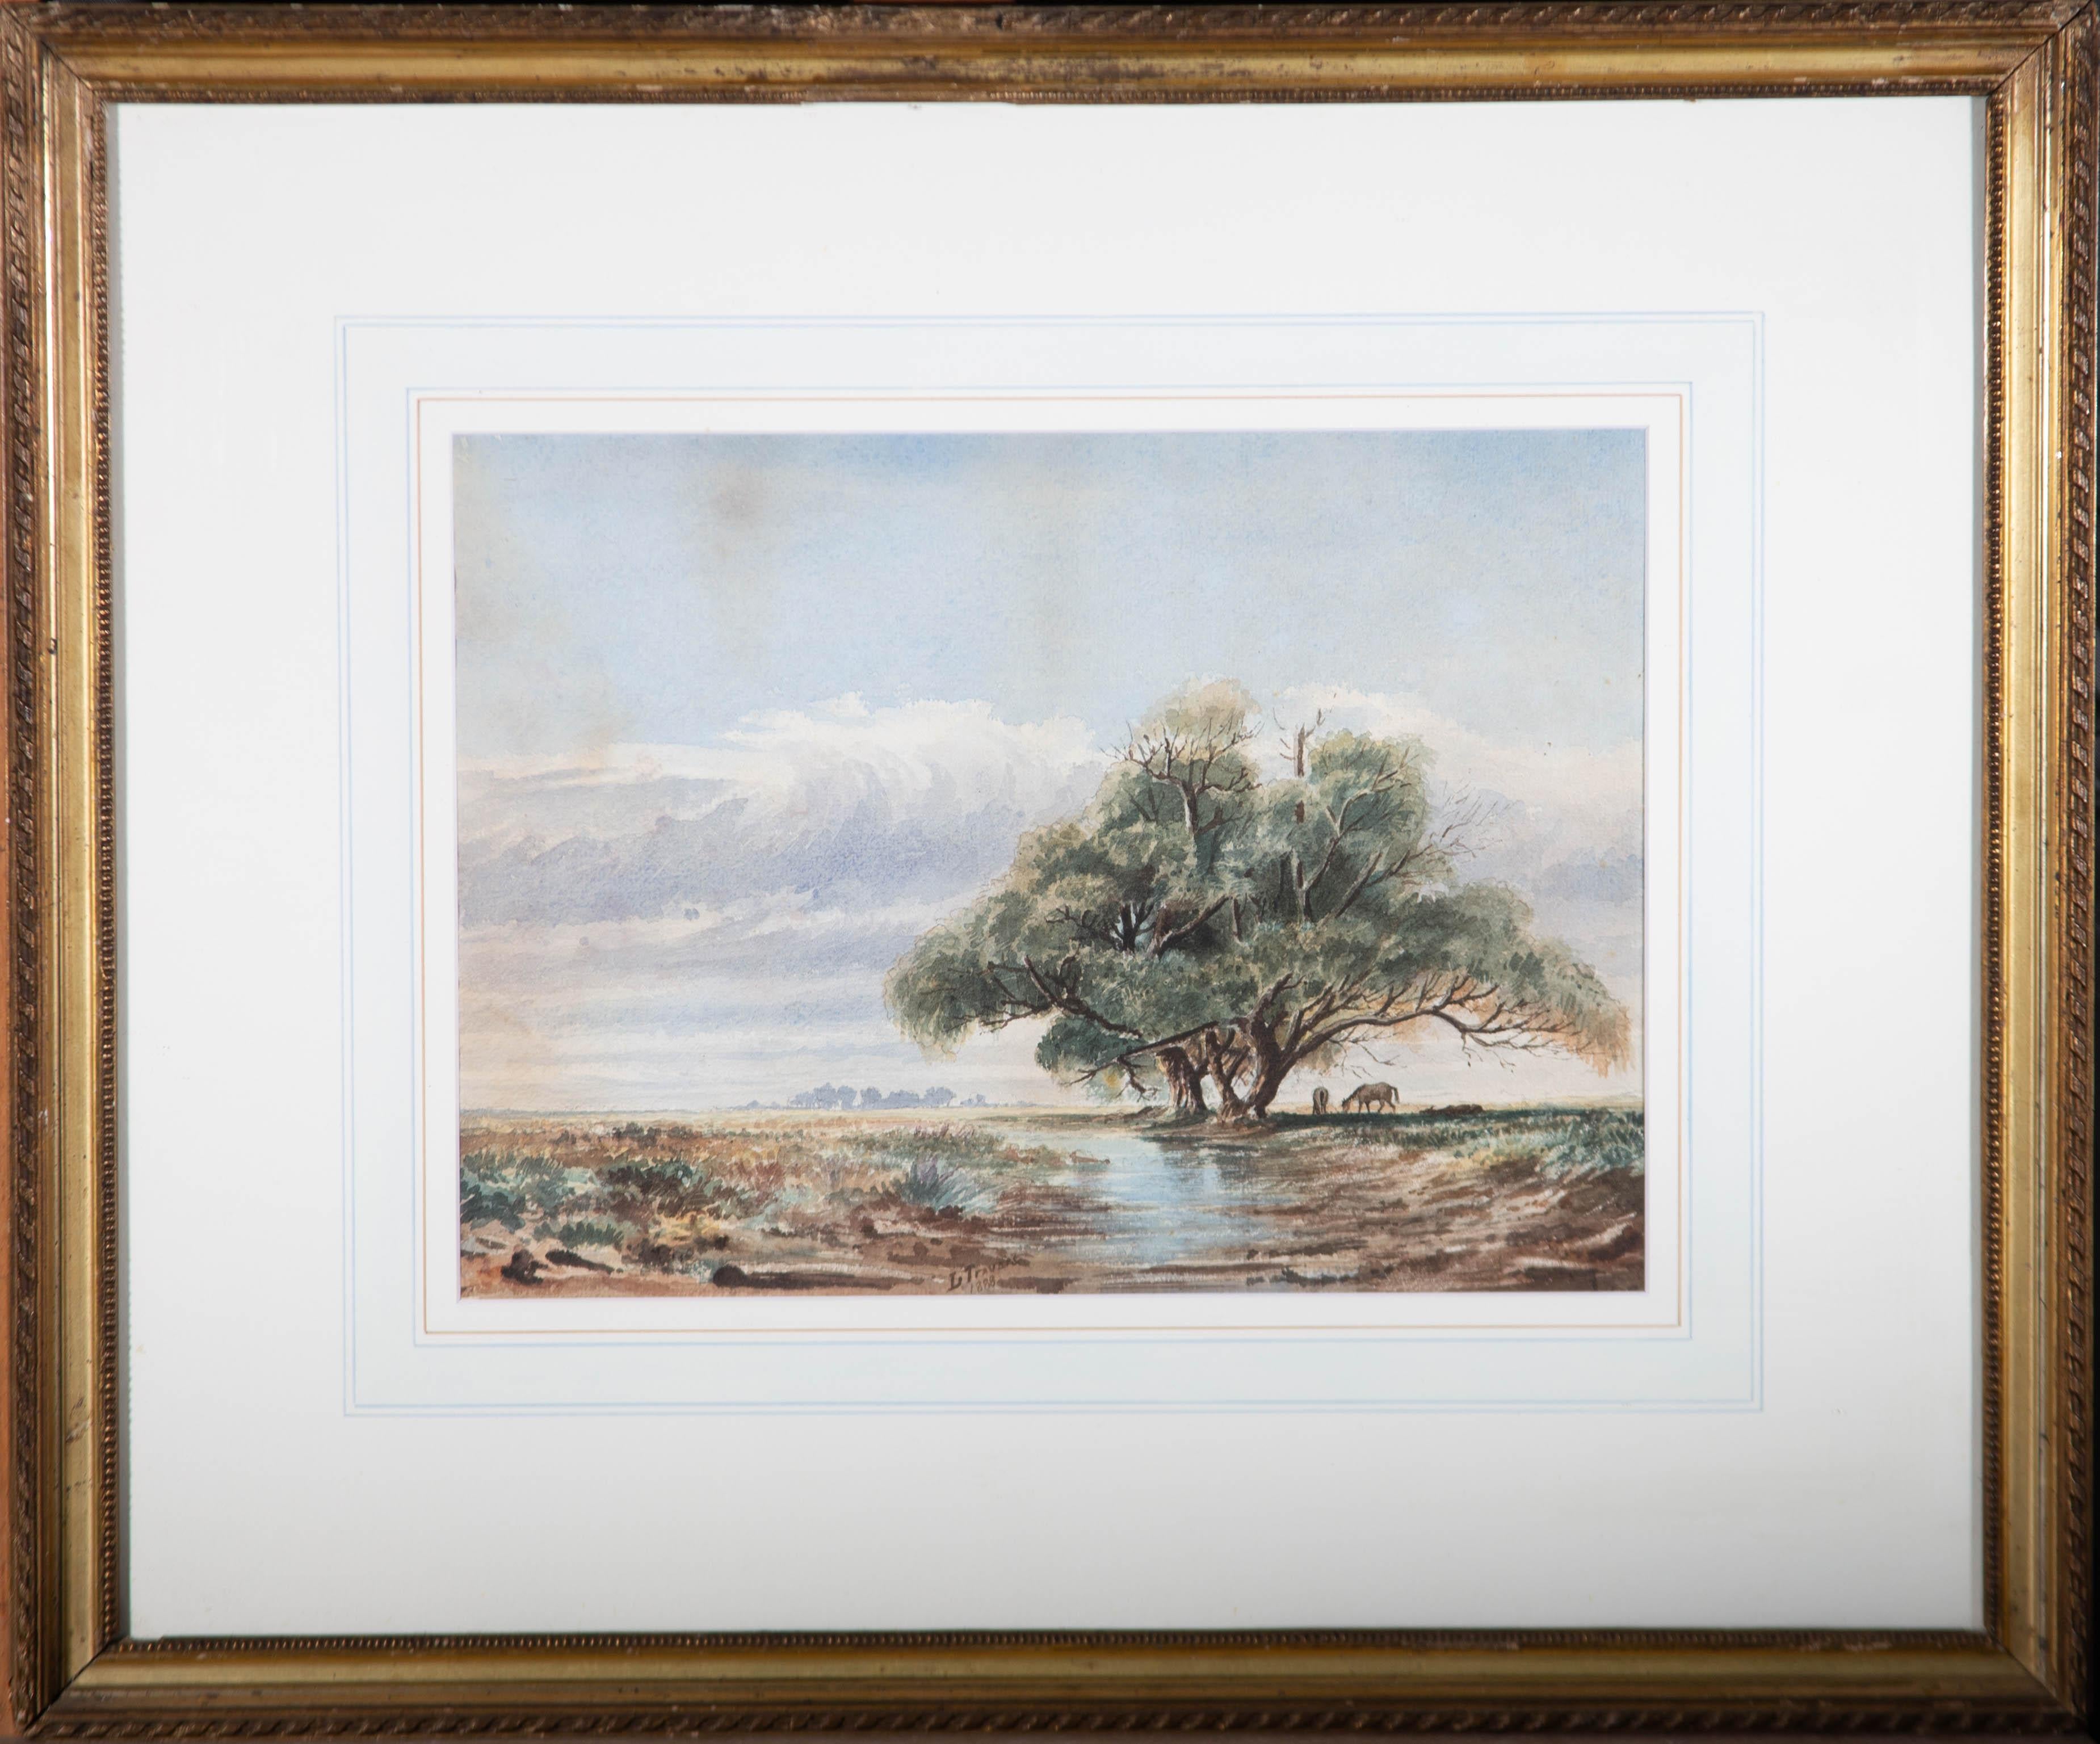 An accomplished watercolour painting by L. Travers, depicting a landscape scene with horses under a tree by a stream of water. Signed and dated to the lower margin. Well-presented in a wash line card mount and in an ornate gilt effect frame. On